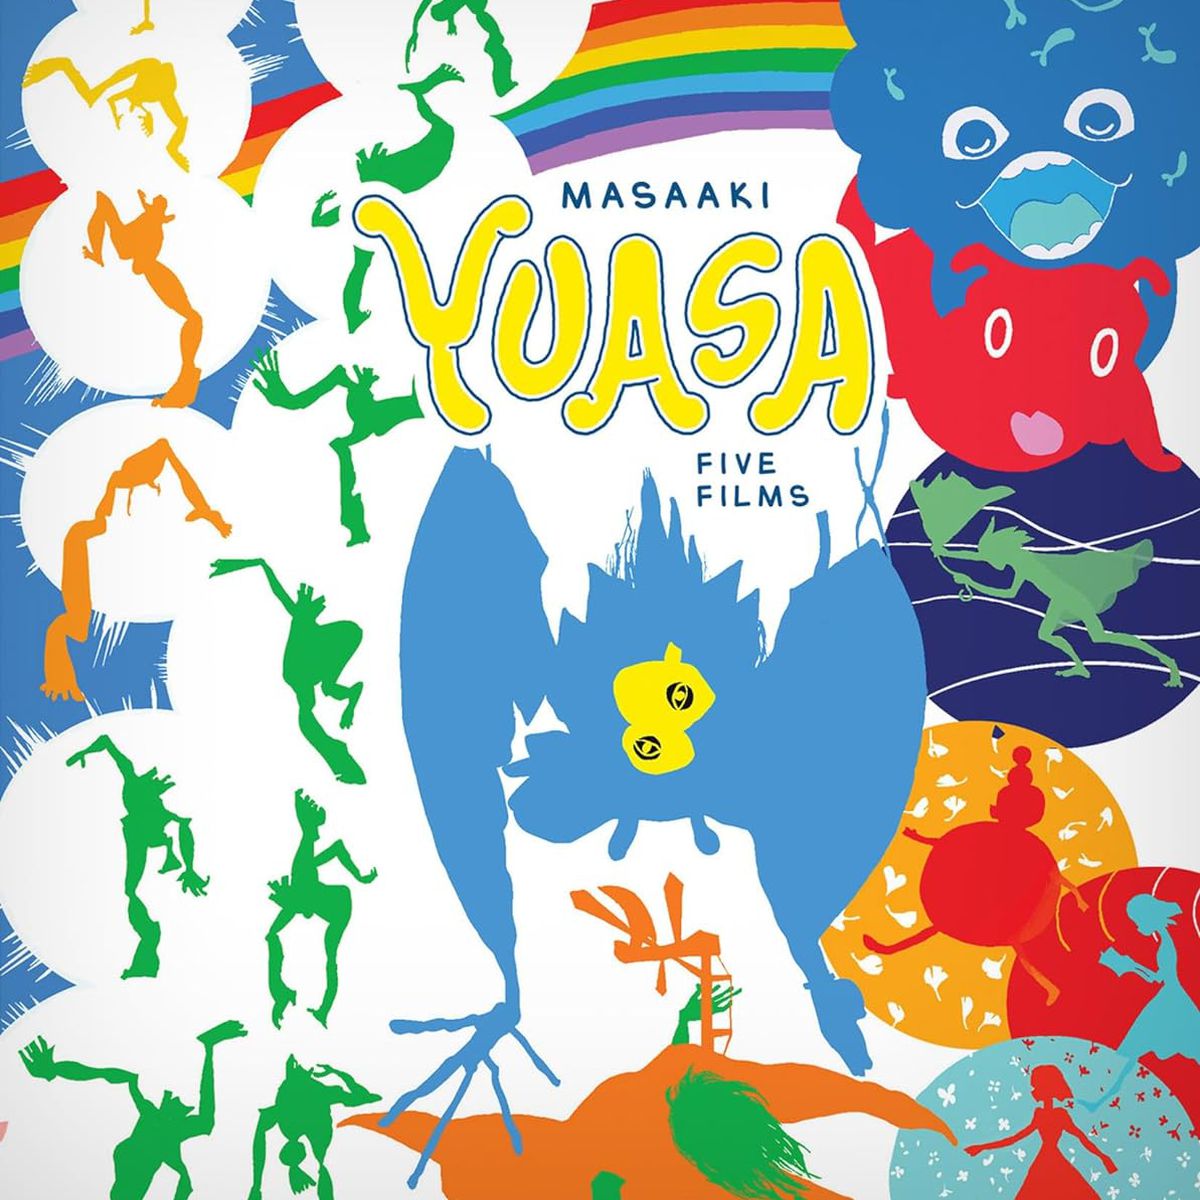 The cover of the Blu-ray set Masaaki Yuasa: Five Films, with a variety of characters from the anime director’s films in sharp silhouette and bright colors